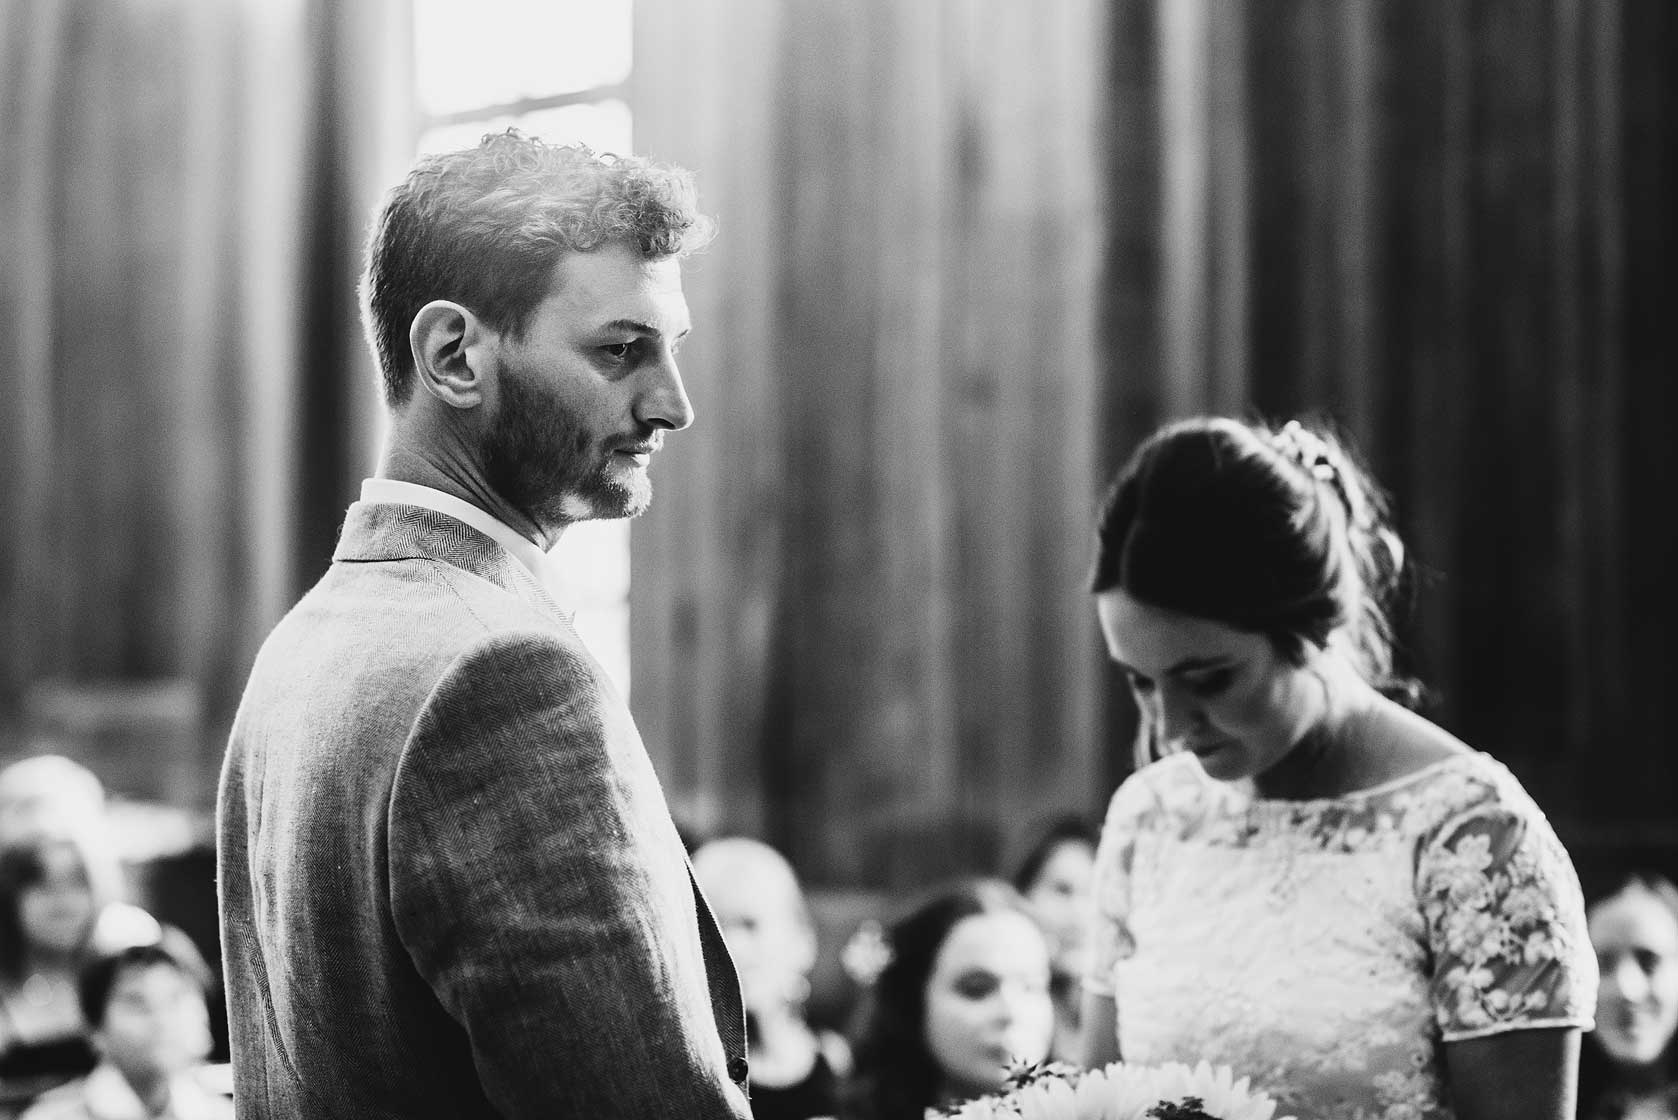 Reportage Wedding Photography at Hackney Town Hall